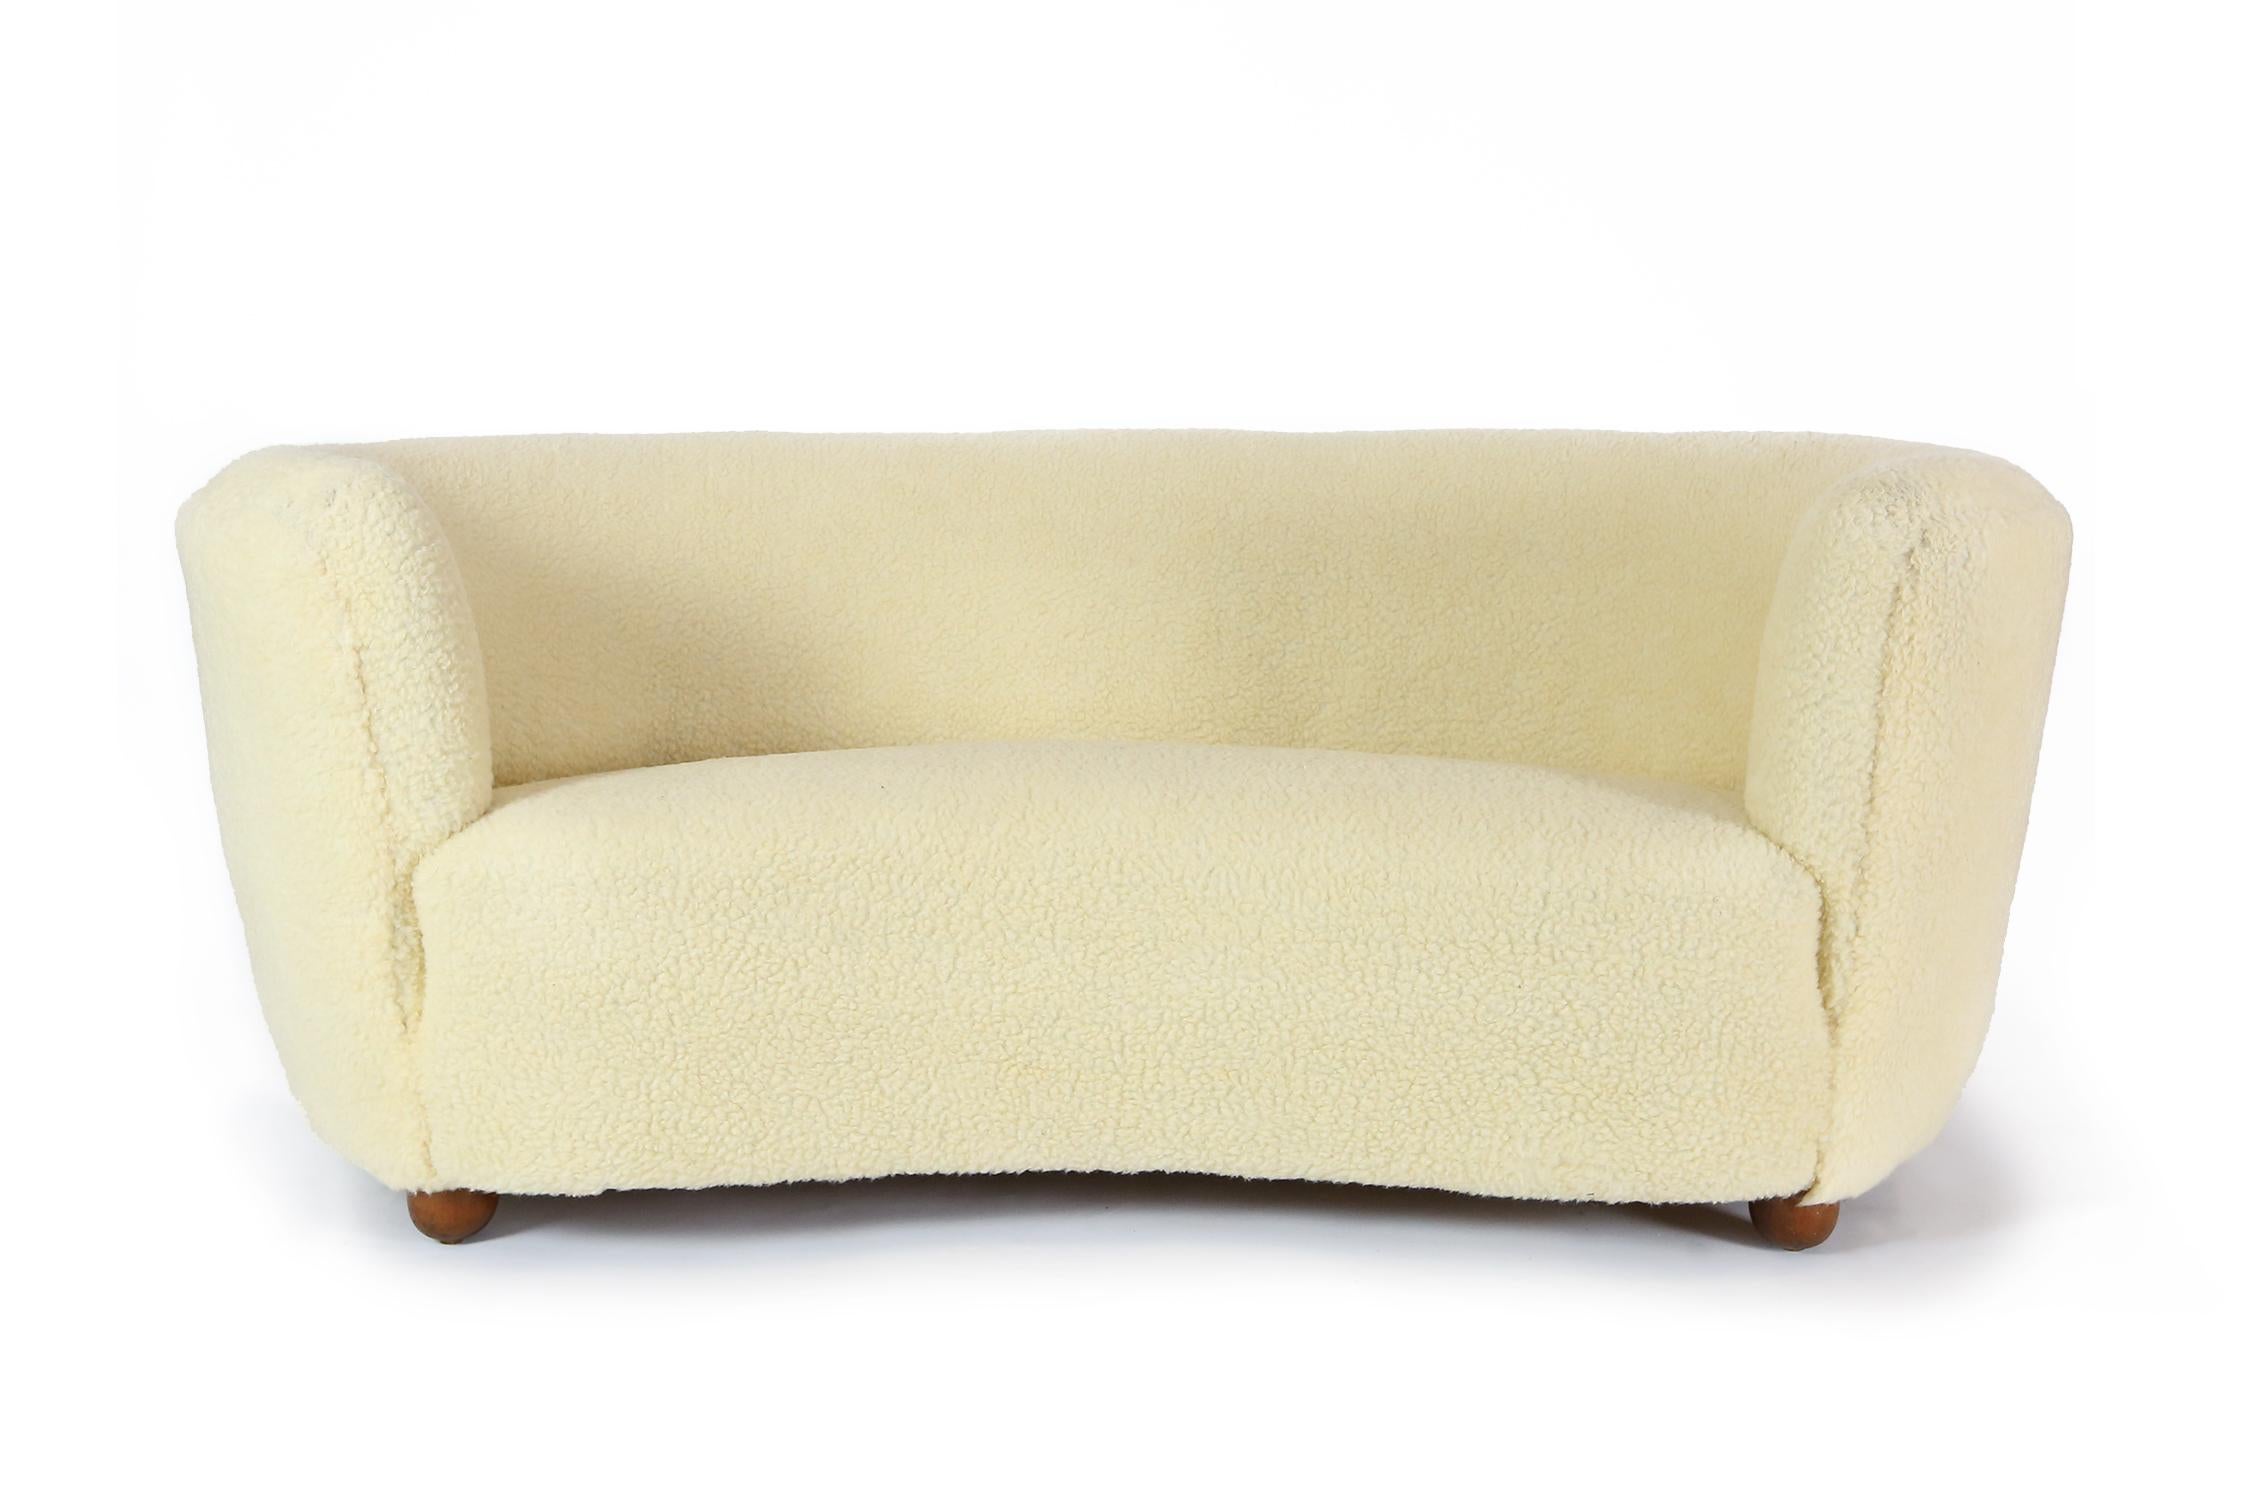 A curved Danish cabinetmakers sofa dating from the 1940s, reupholstered in sheepskin fabric.